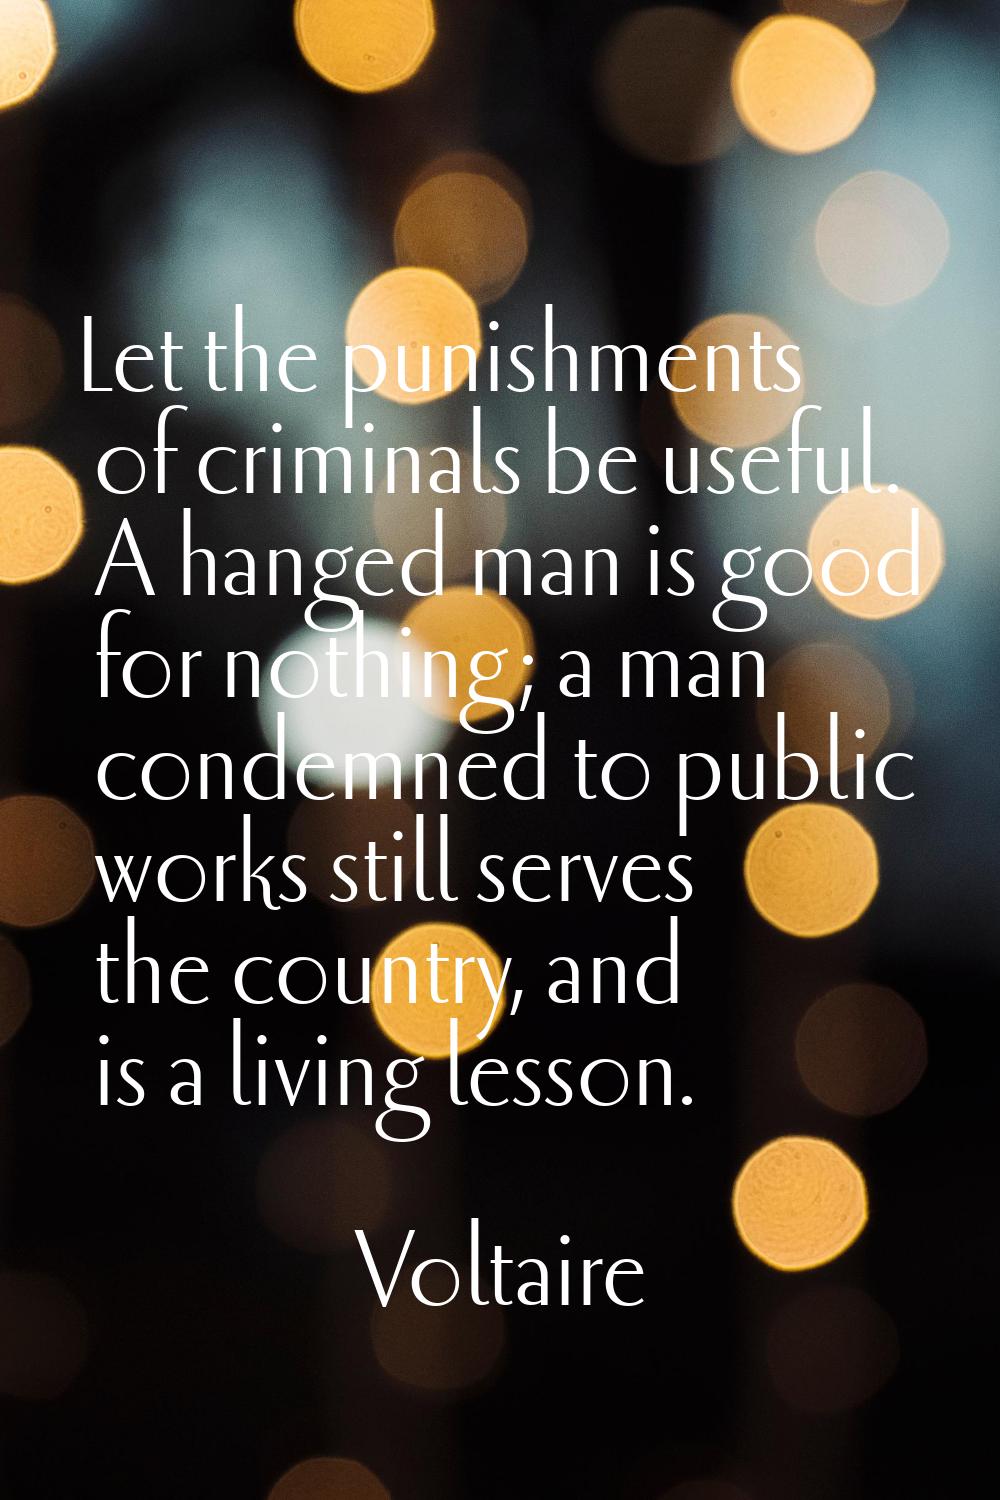 Let the punishments of criminals be useful. A hanged man is good for nothing; a man condemned to pu